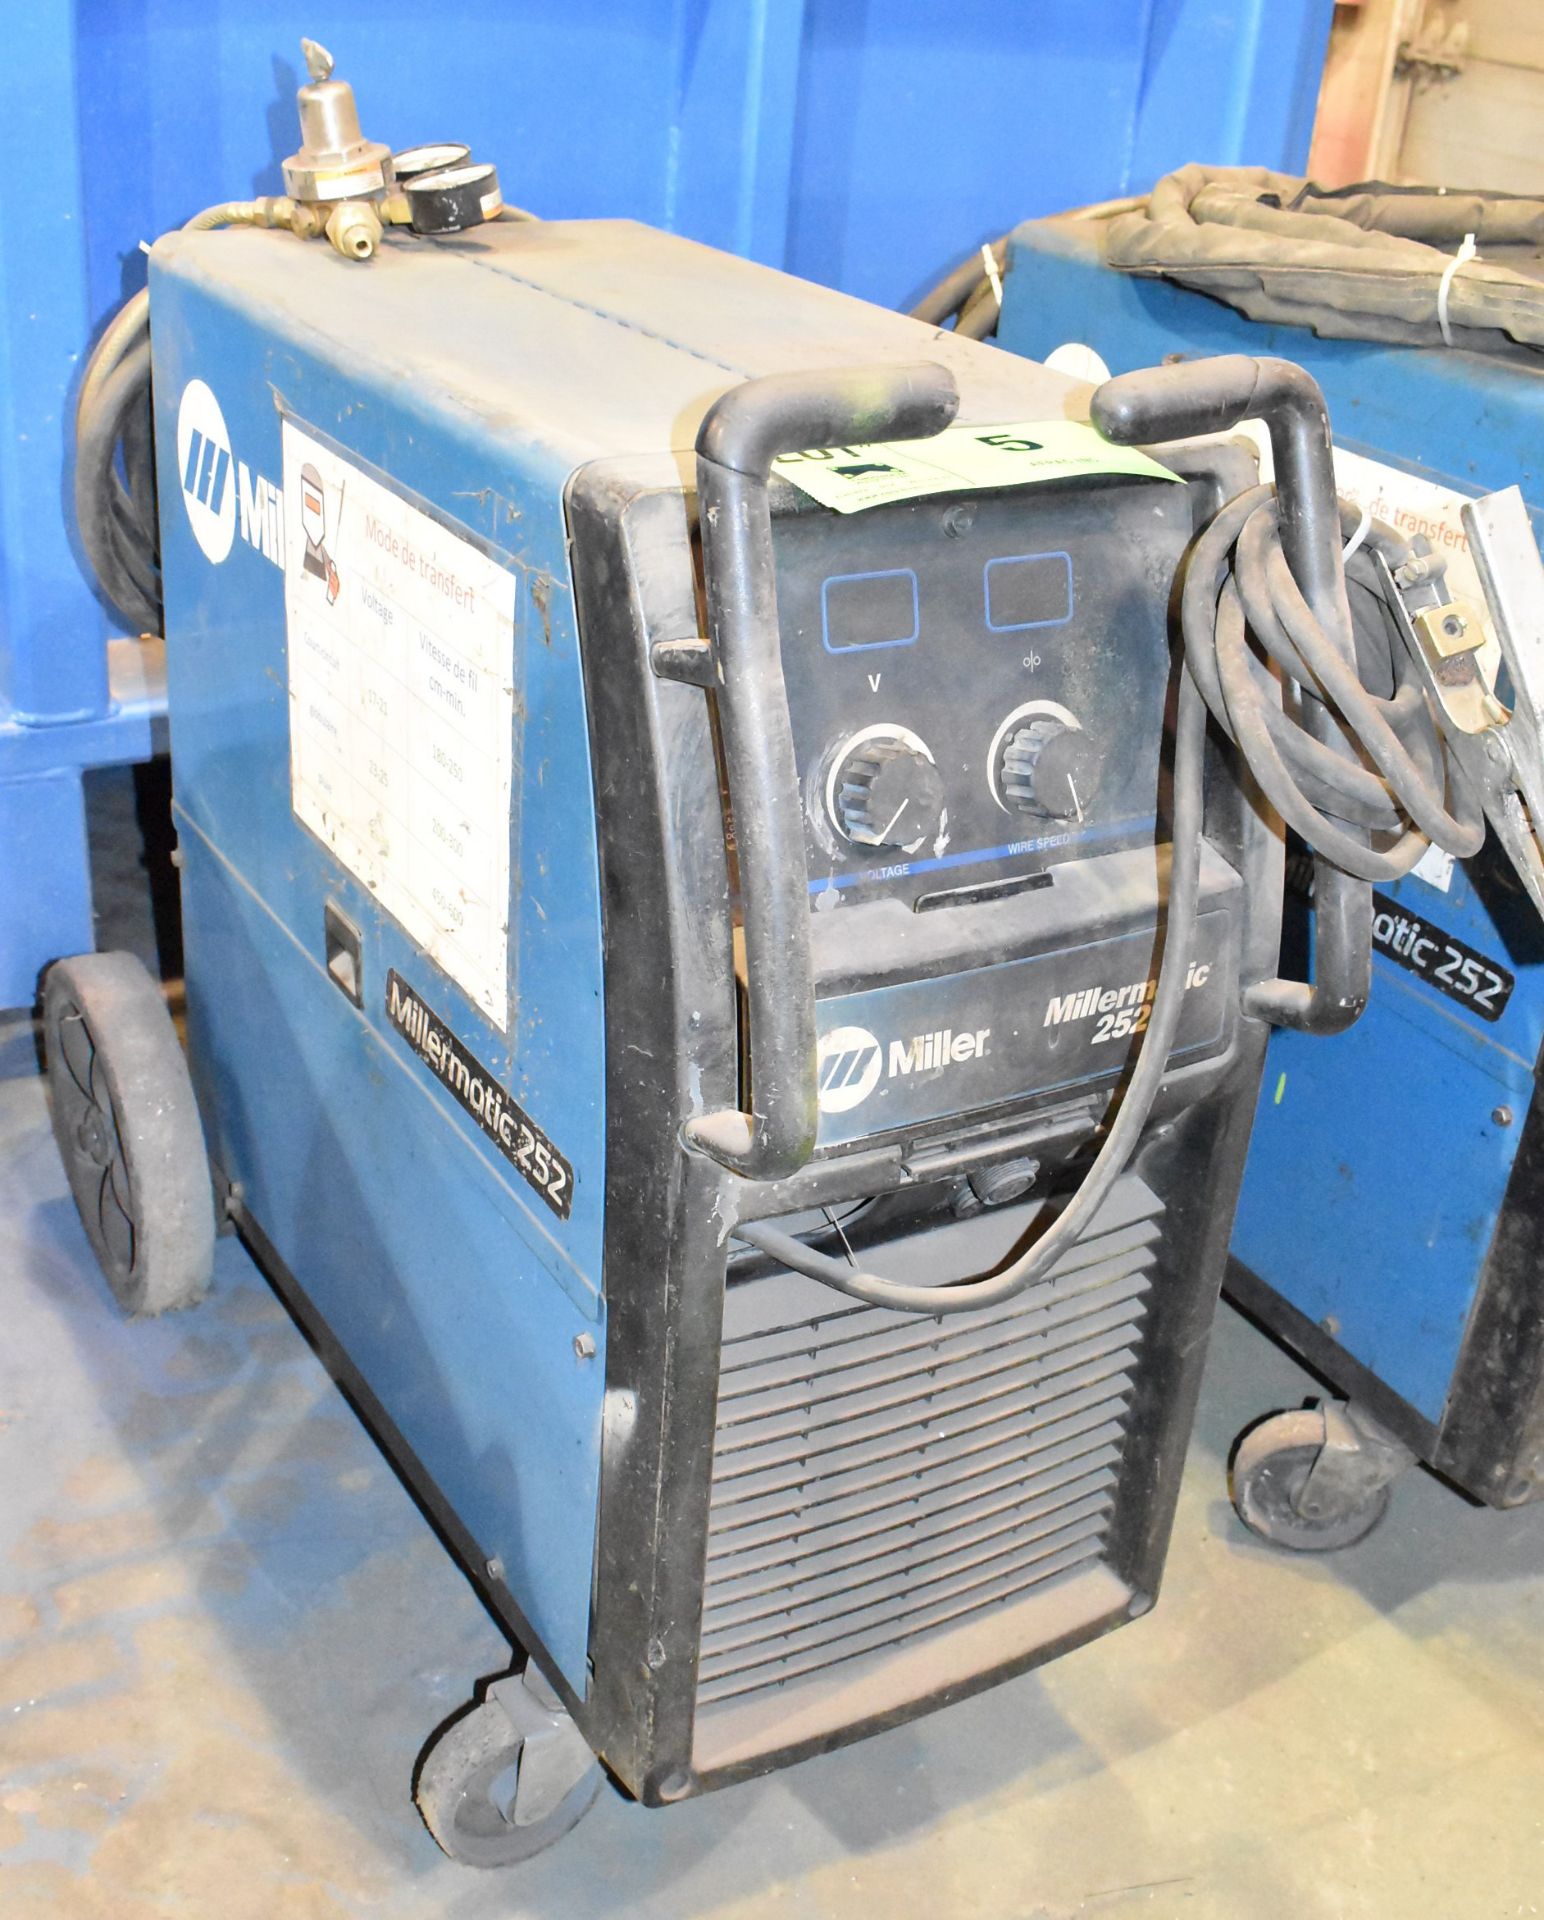 MILLER MILLERMATIC 252 MIG WELDER WITH CABLES AND GUN, S/N MJ260046N